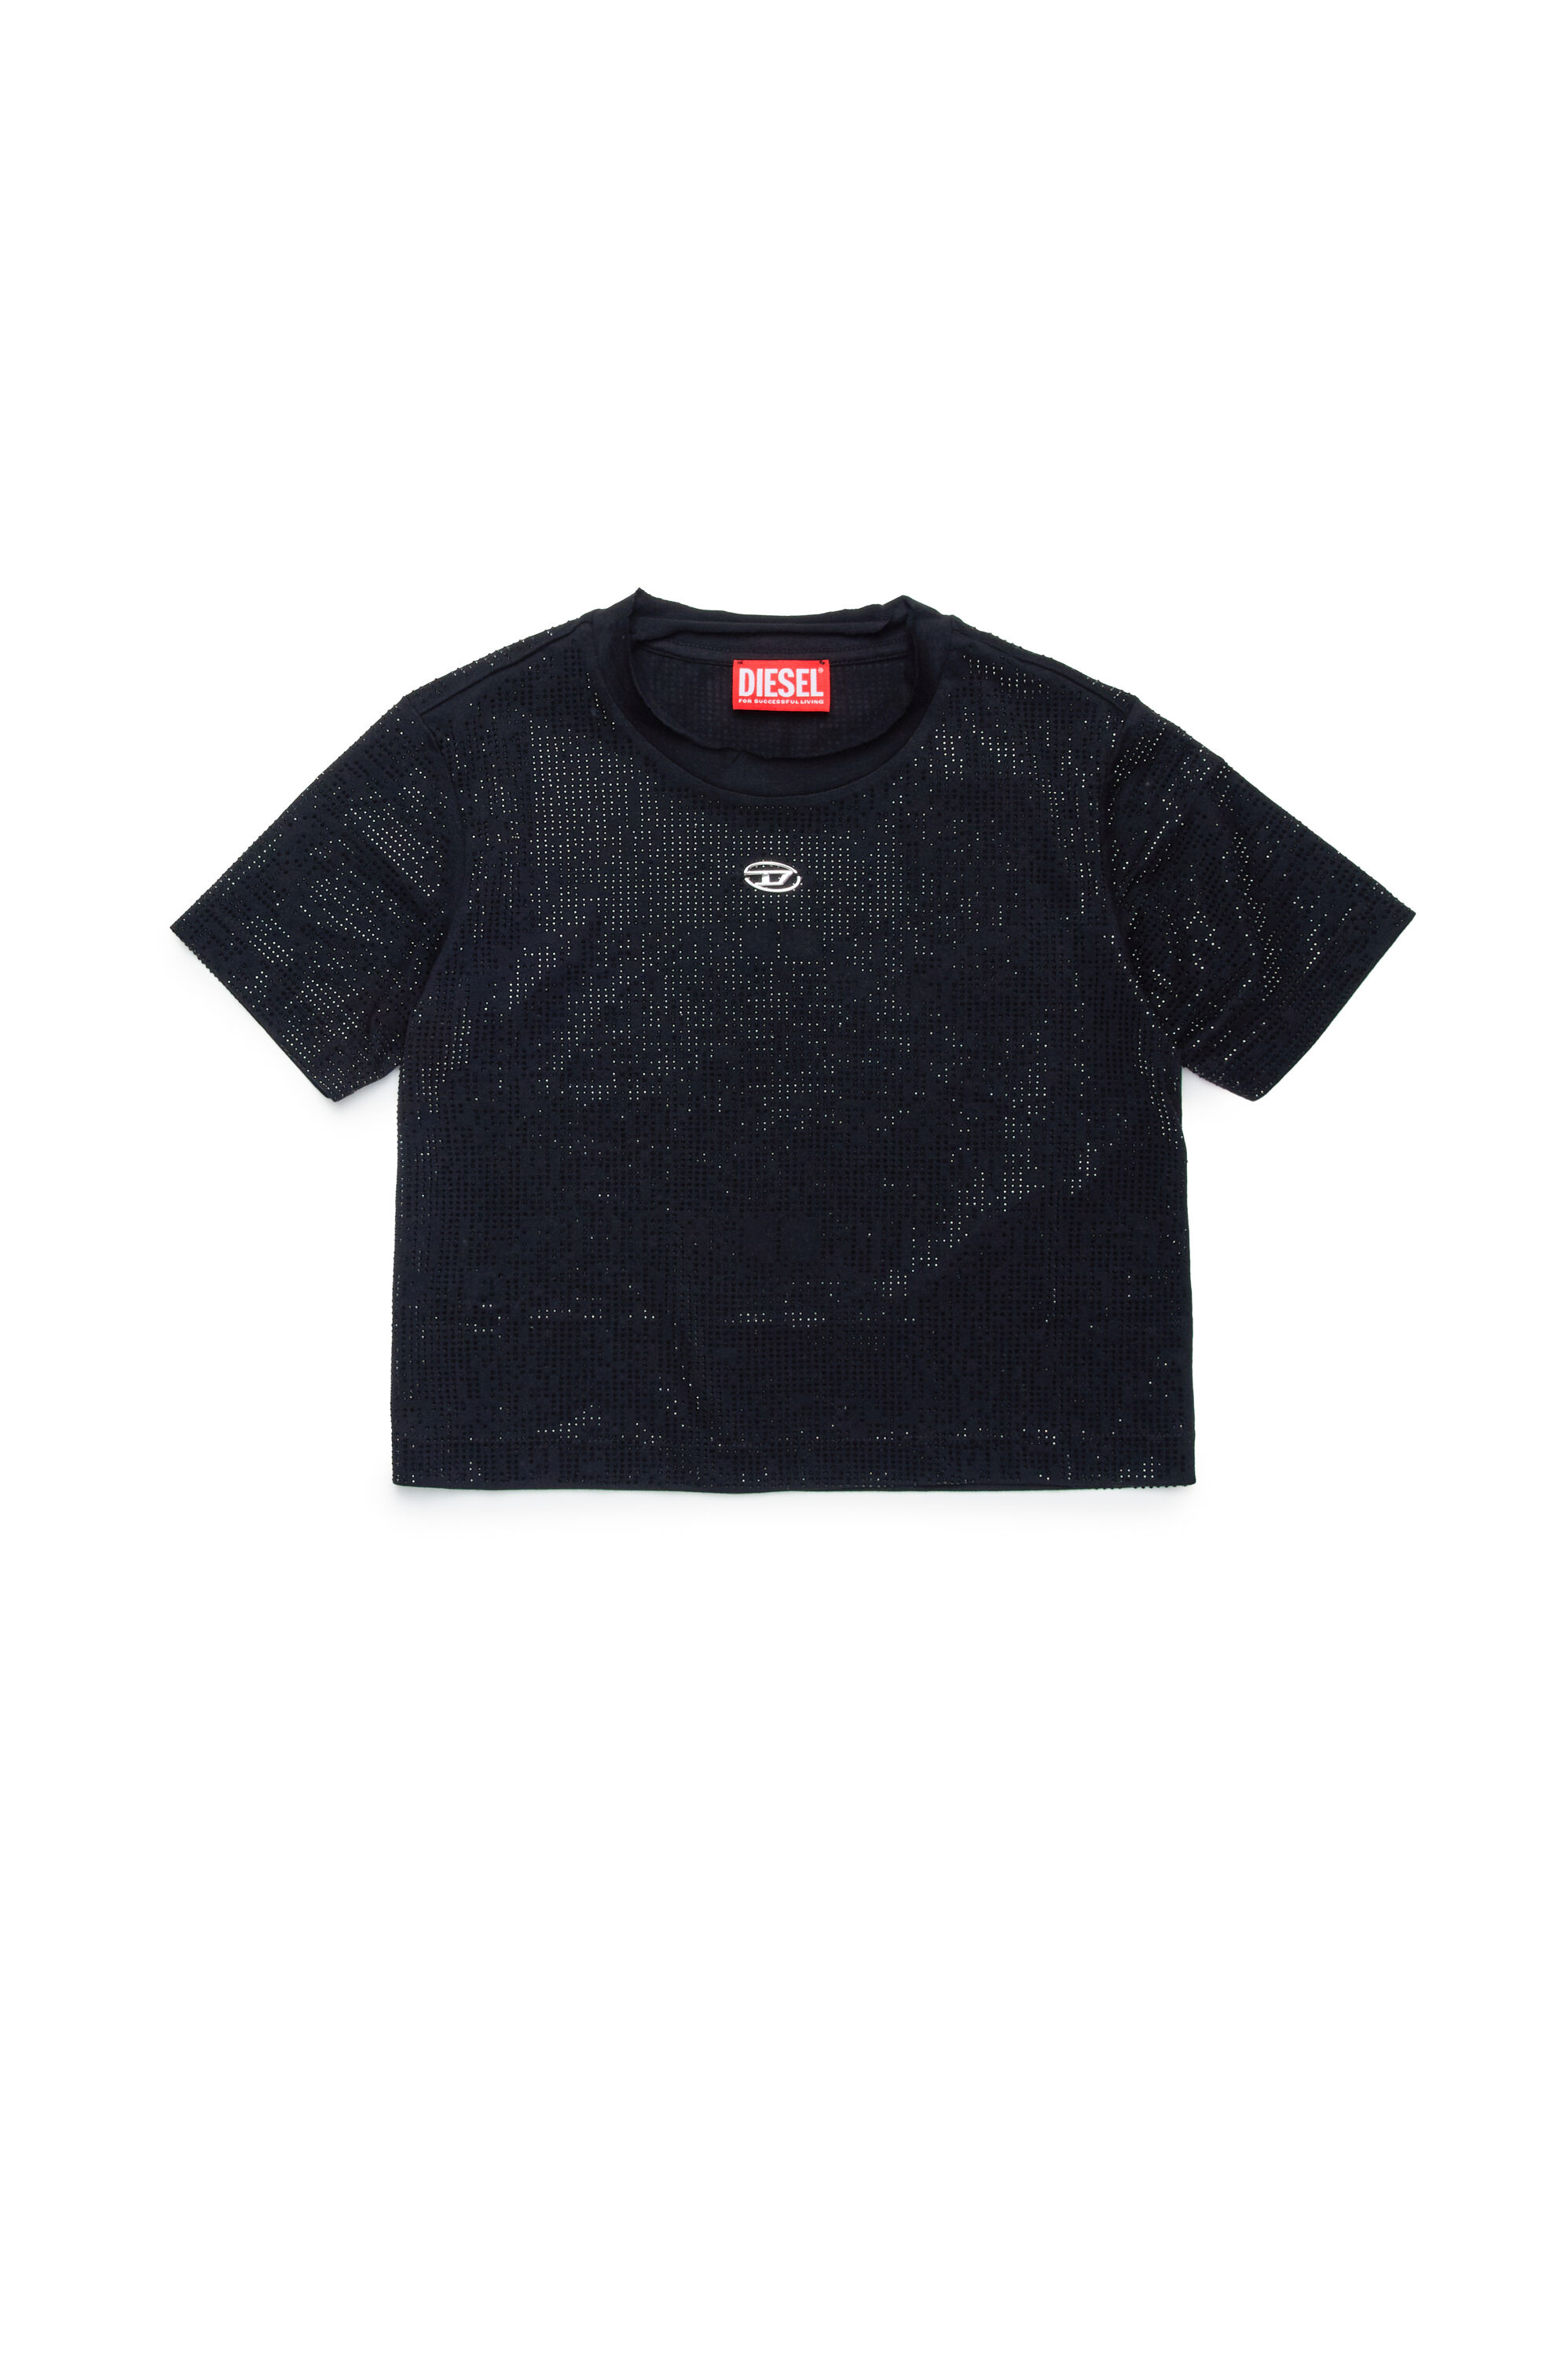 Diesel - TYFRY, Donna T-shirt in cotone con micro-strass in Nero - Image 1